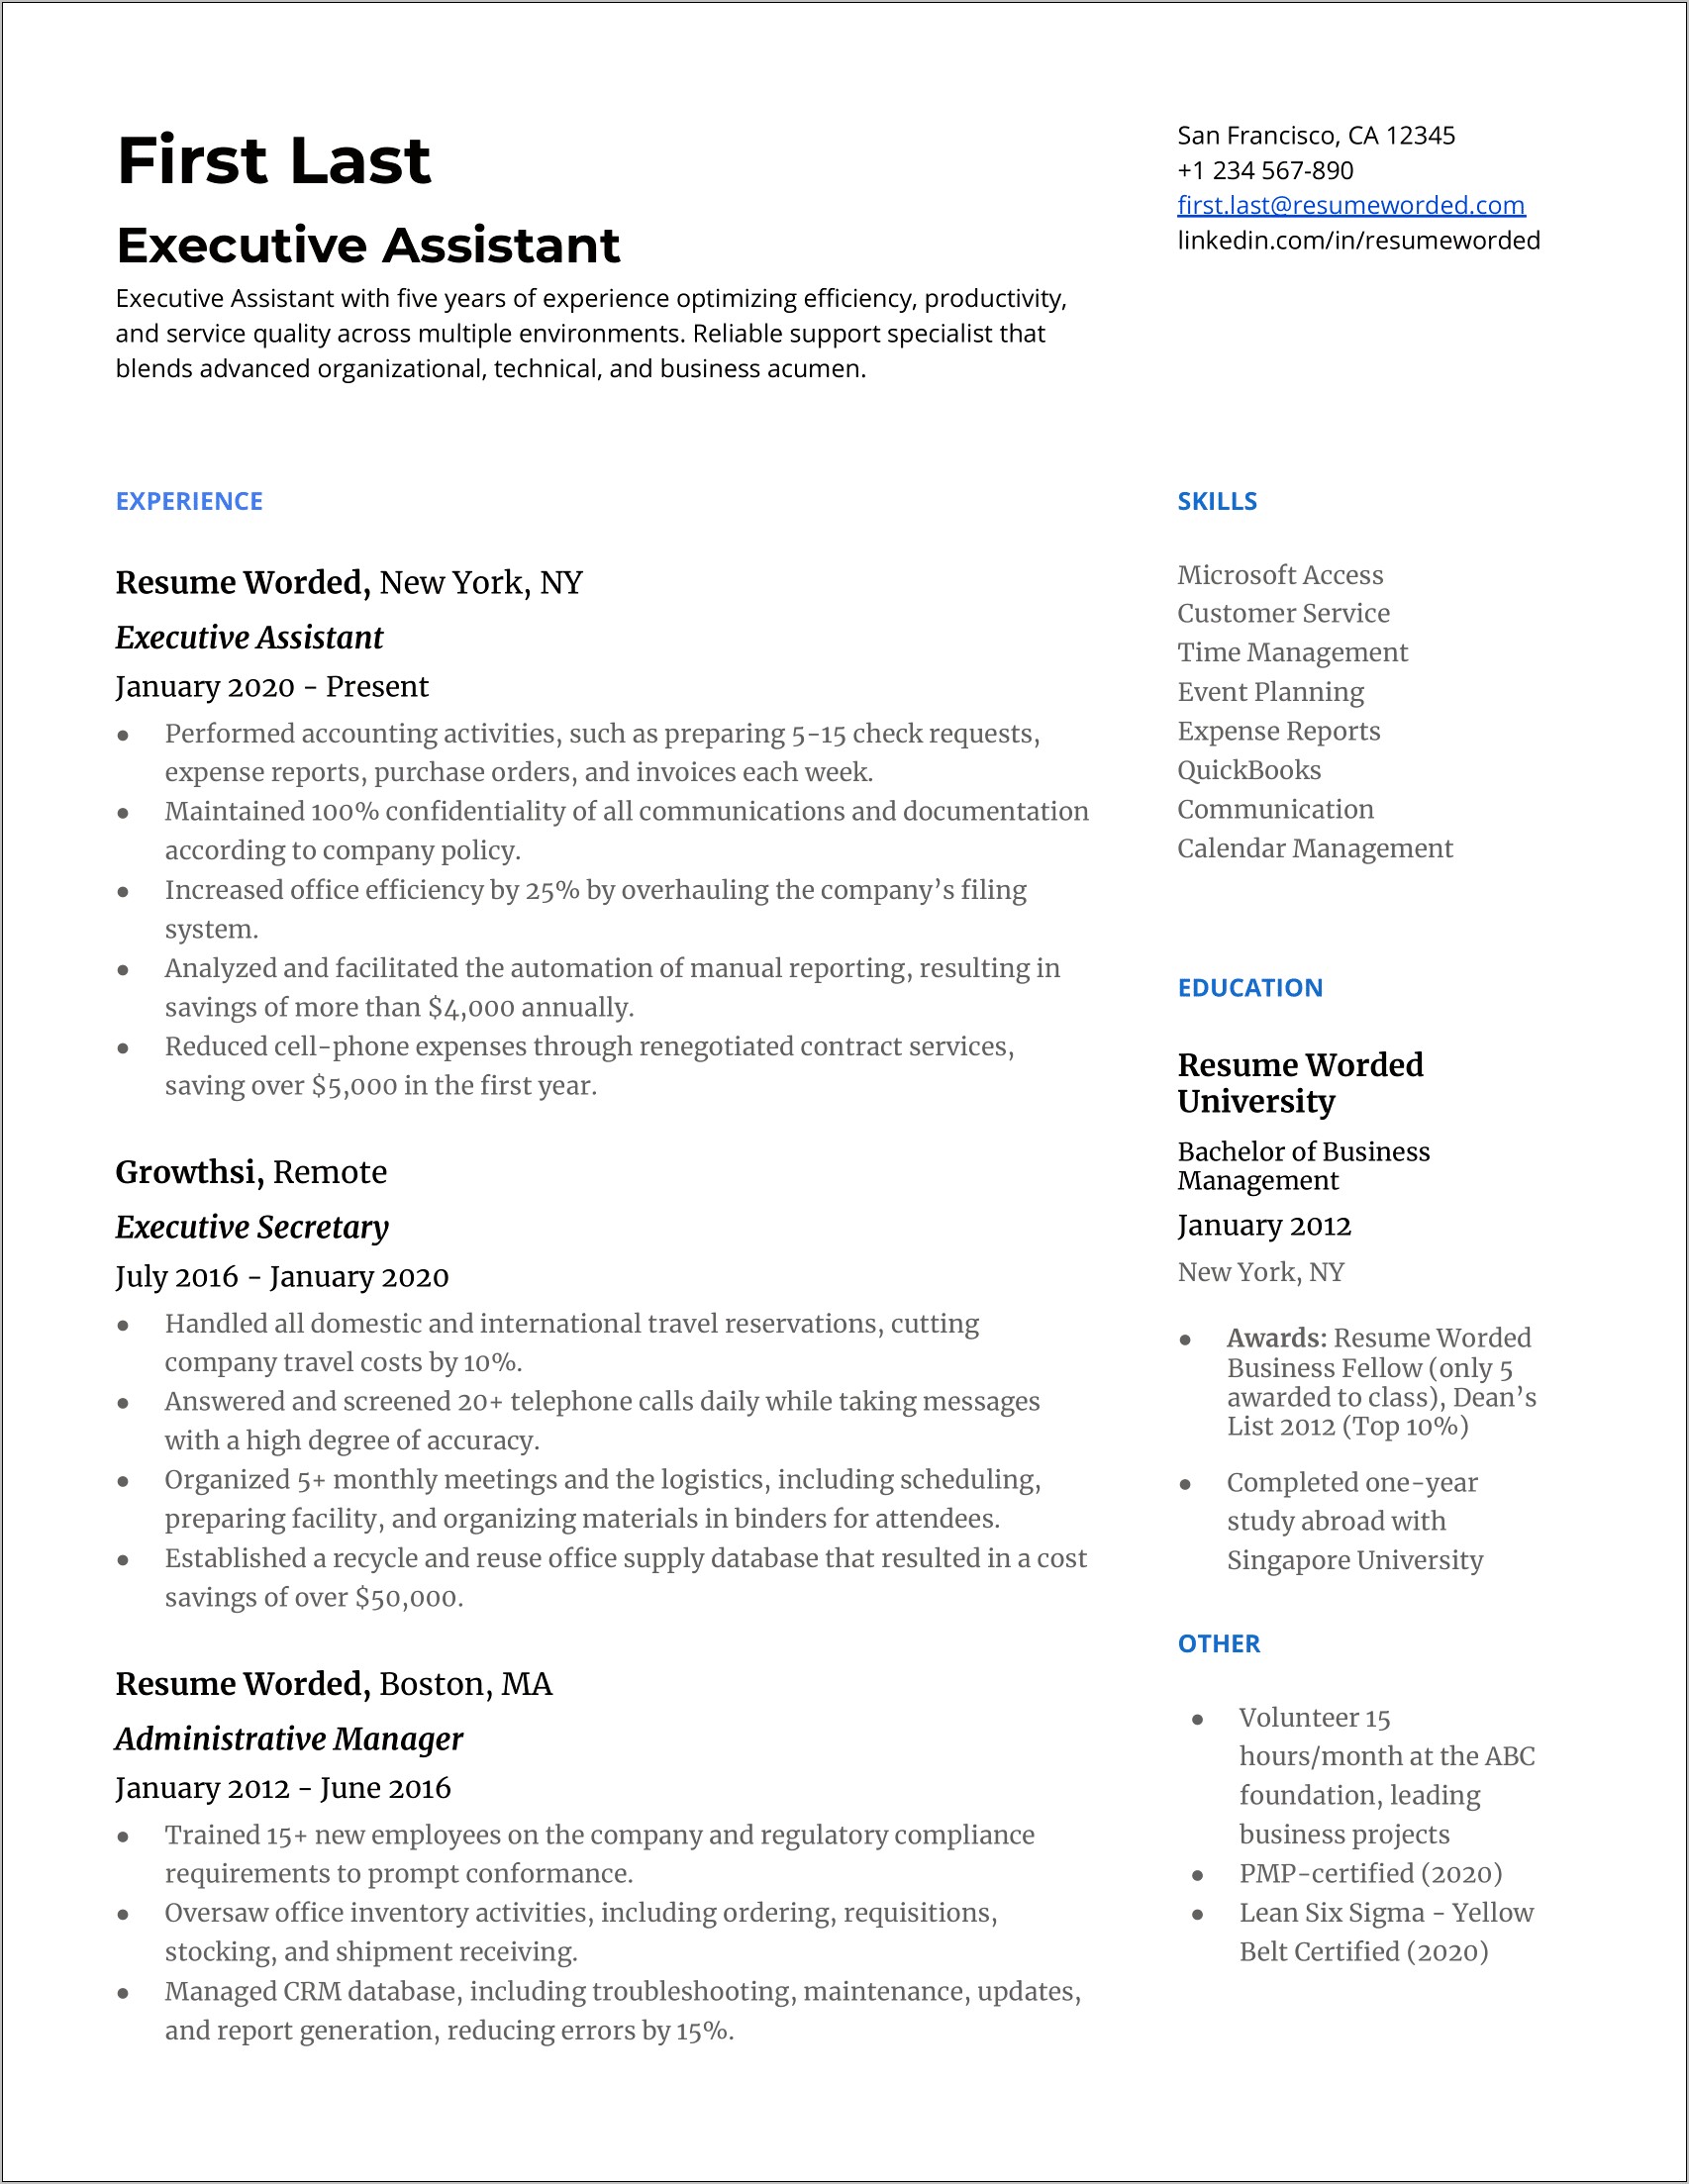 Home Health Office Manager Resume Headline